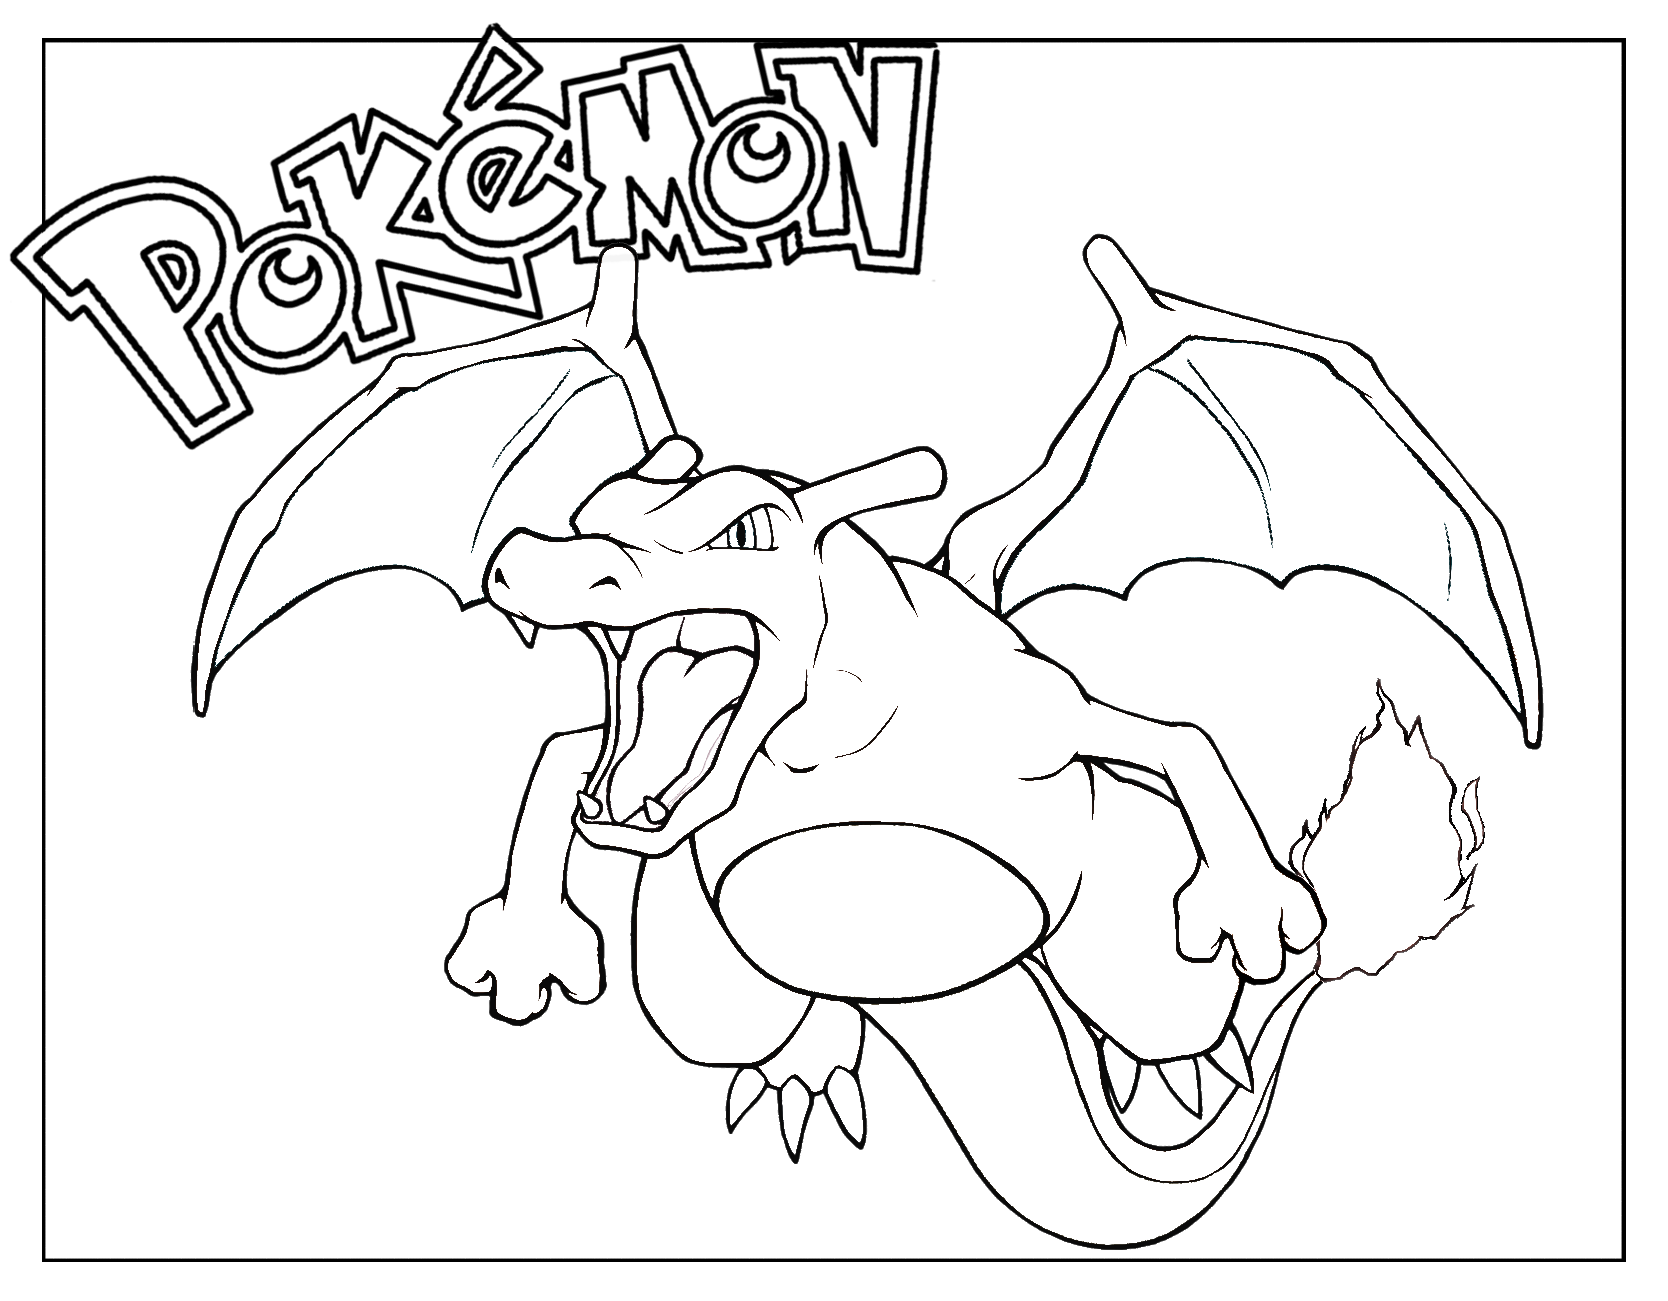 charizard gx coloring pages